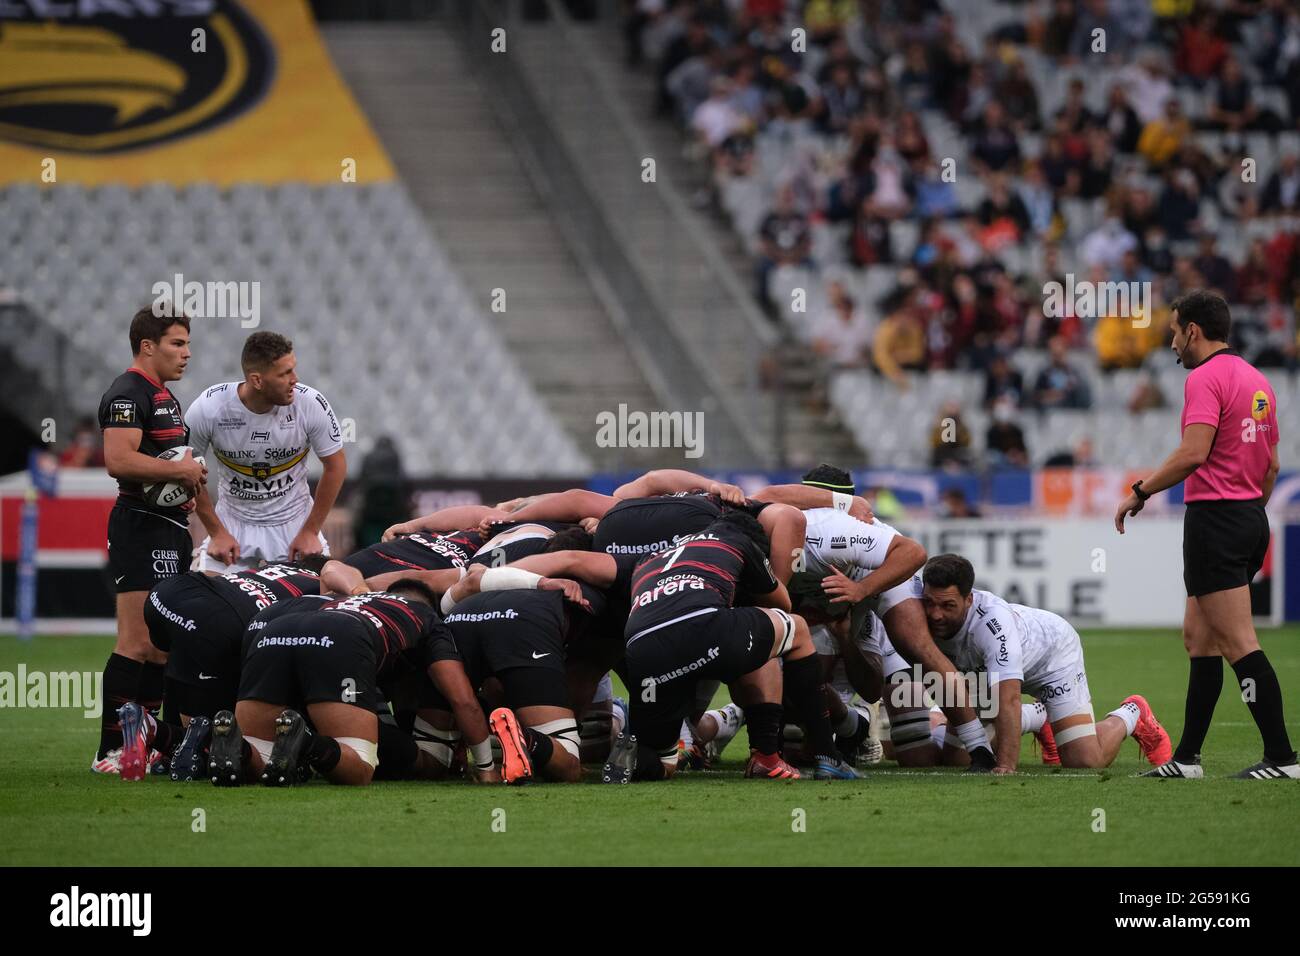 Paris, France. 26th June, 2021. Stade Toulousain Scrum half ANTOINE DUPONT player of the match in action during the final French rugby Championship 14 between Stade Toulousain and Stade Rochelais